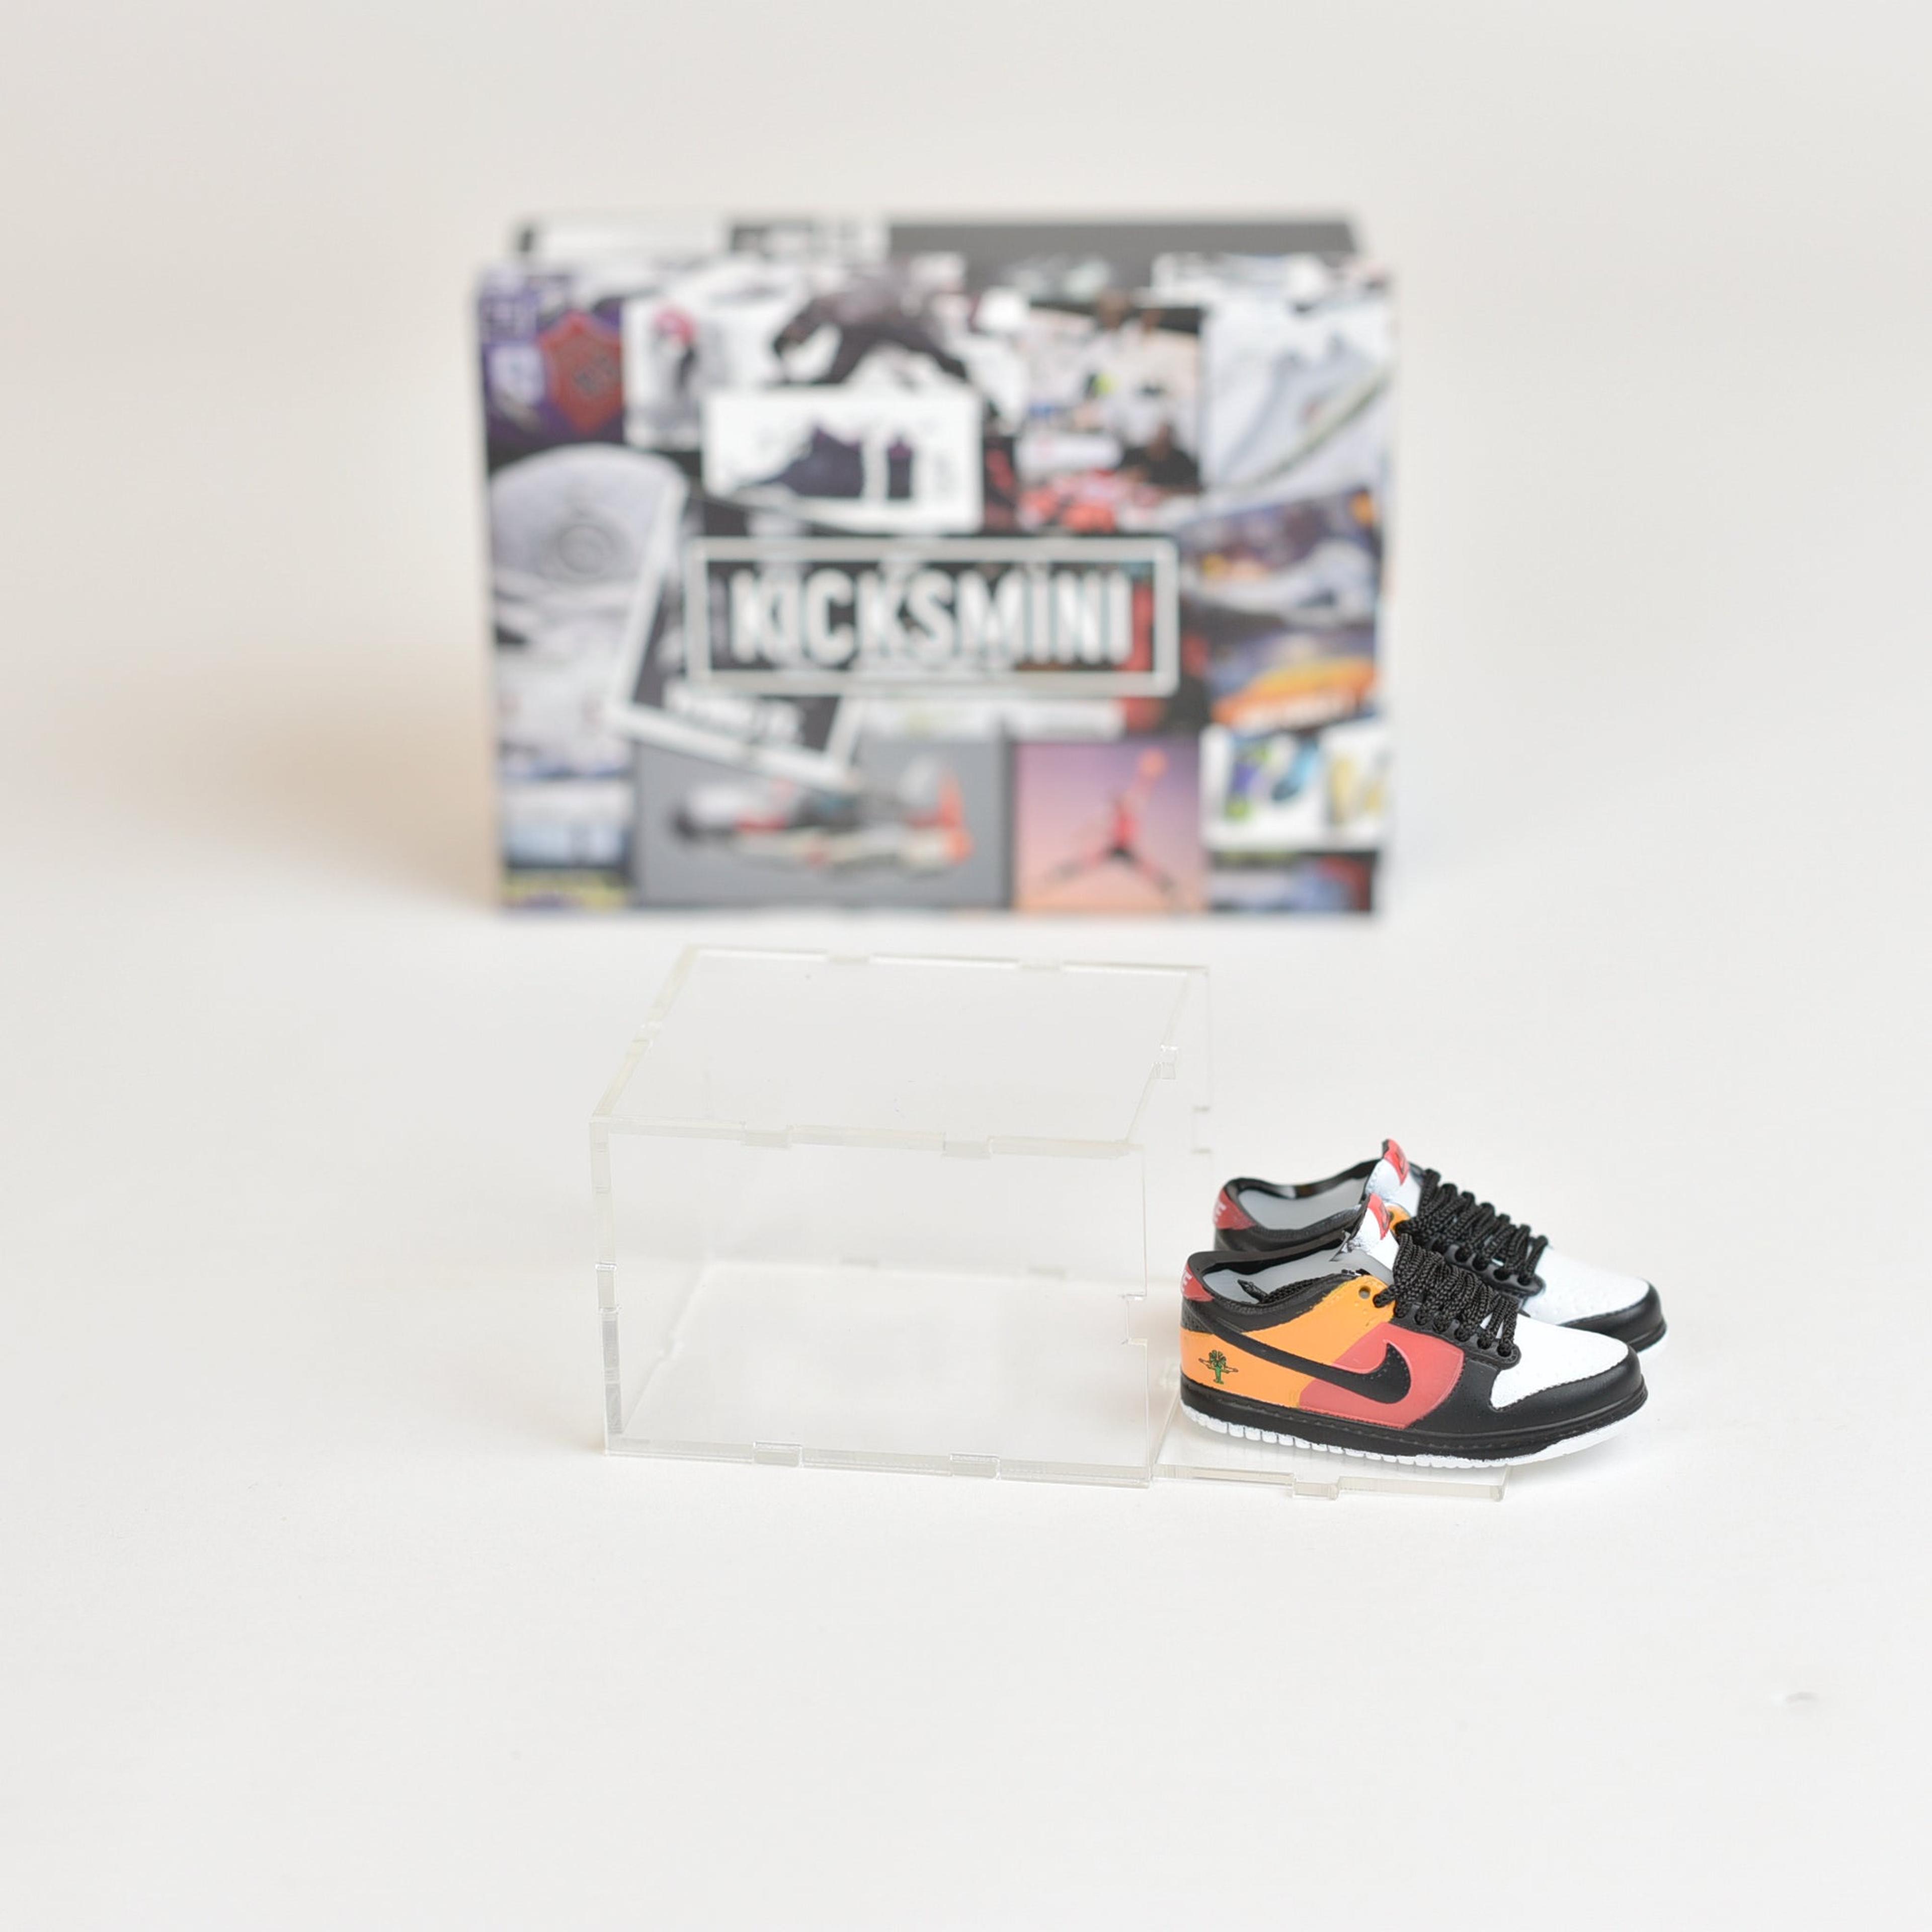 Alternate View 34 of SB Dunk Low Collaboration Mini Sneakers with Display Case